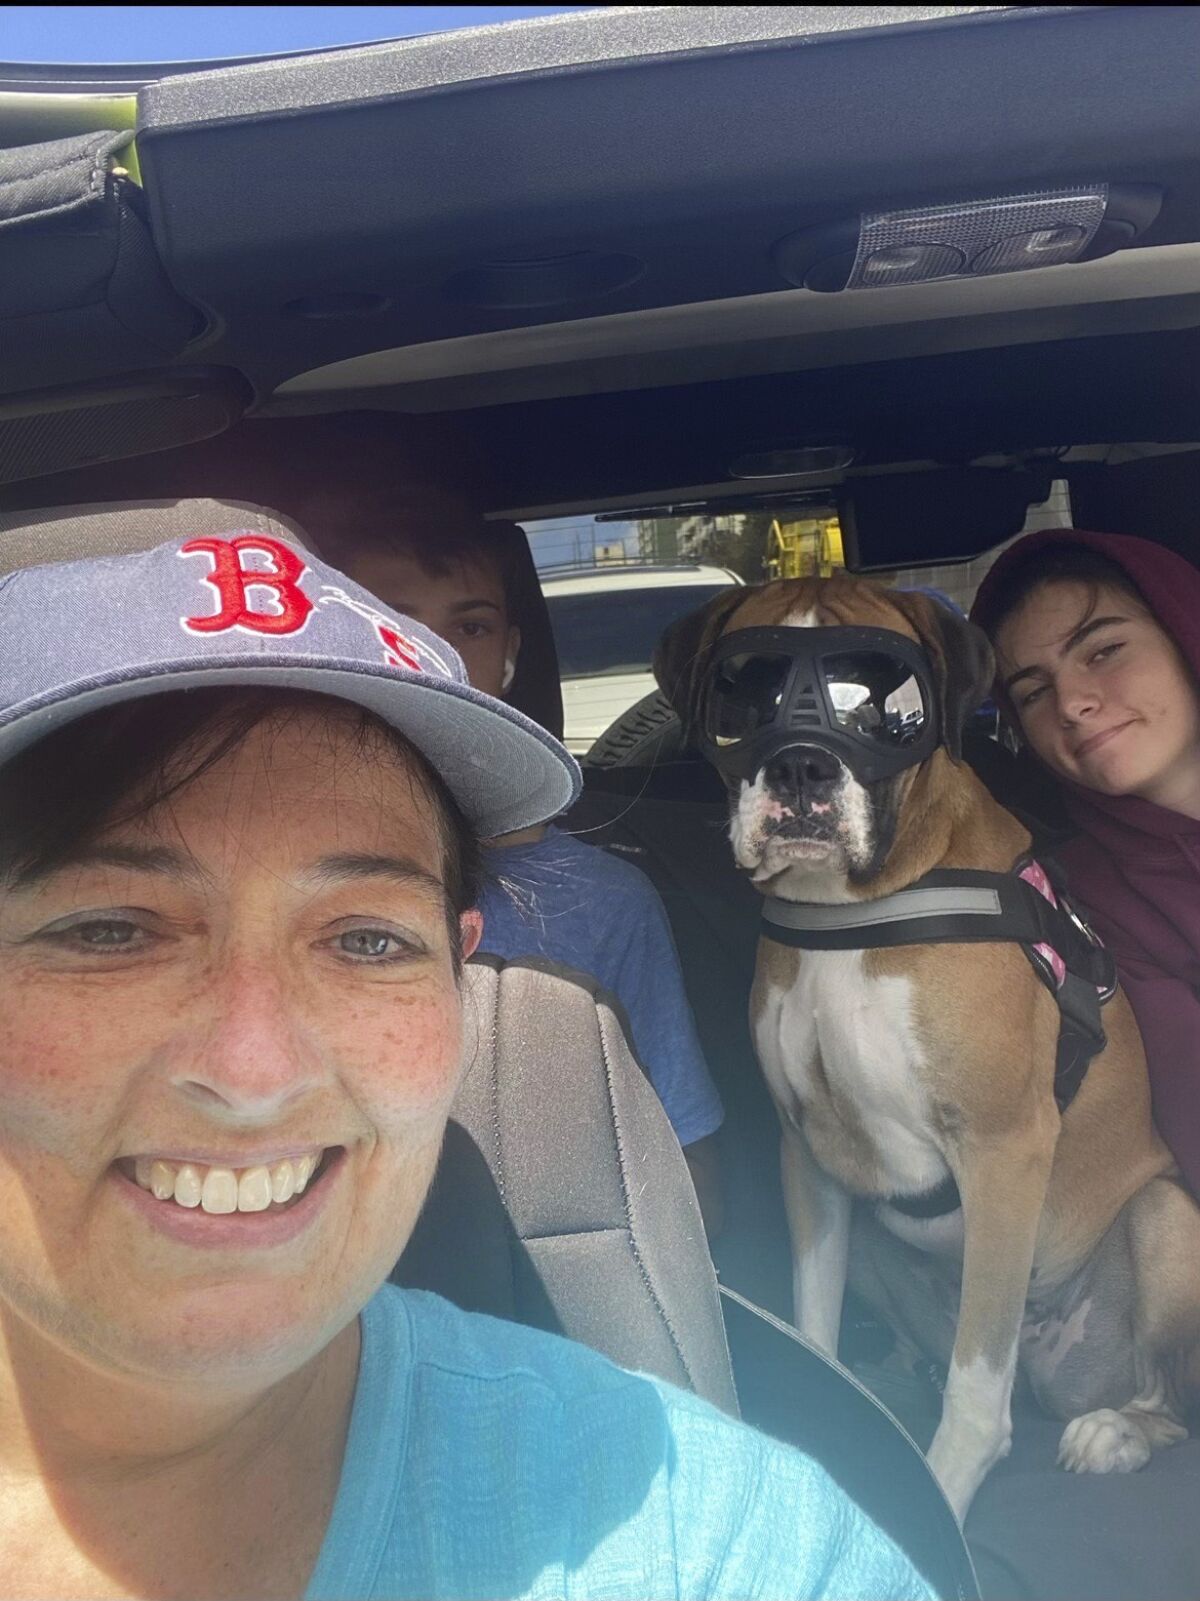 Selfie of a woman, her children and their dog, wearing goggles, in a car